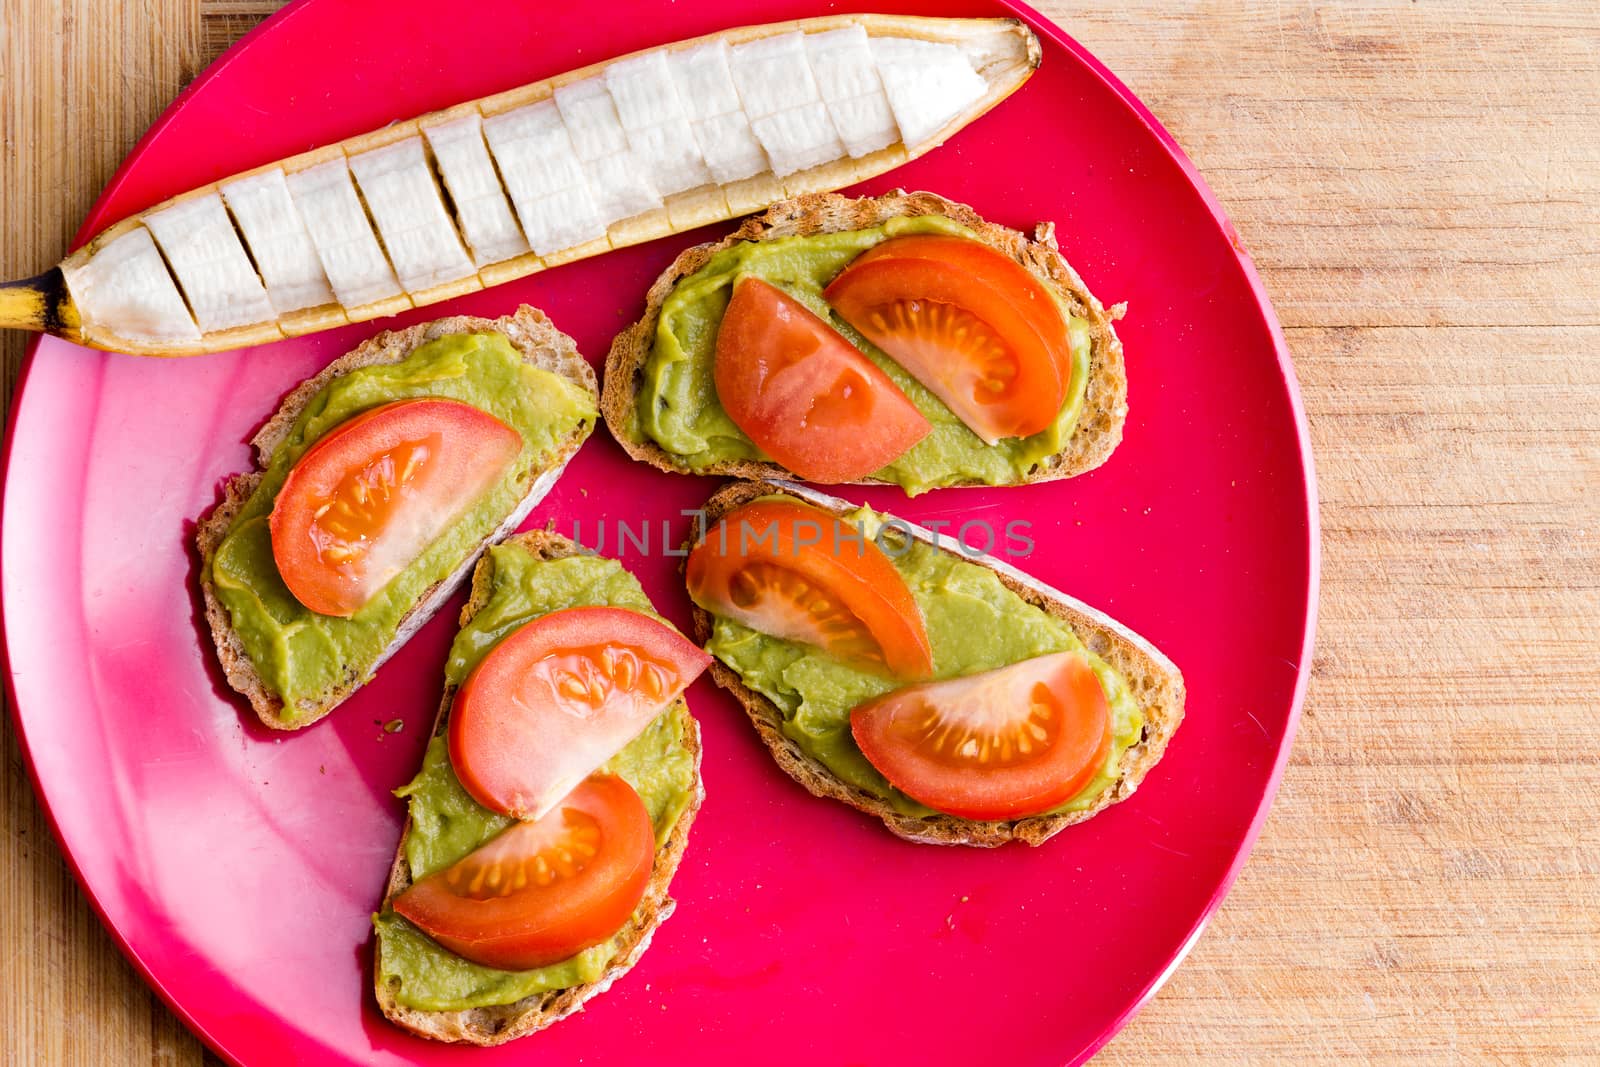 Healthy plate with sliced banana next to avocado and tomato sandwich served in red plate on wooden table